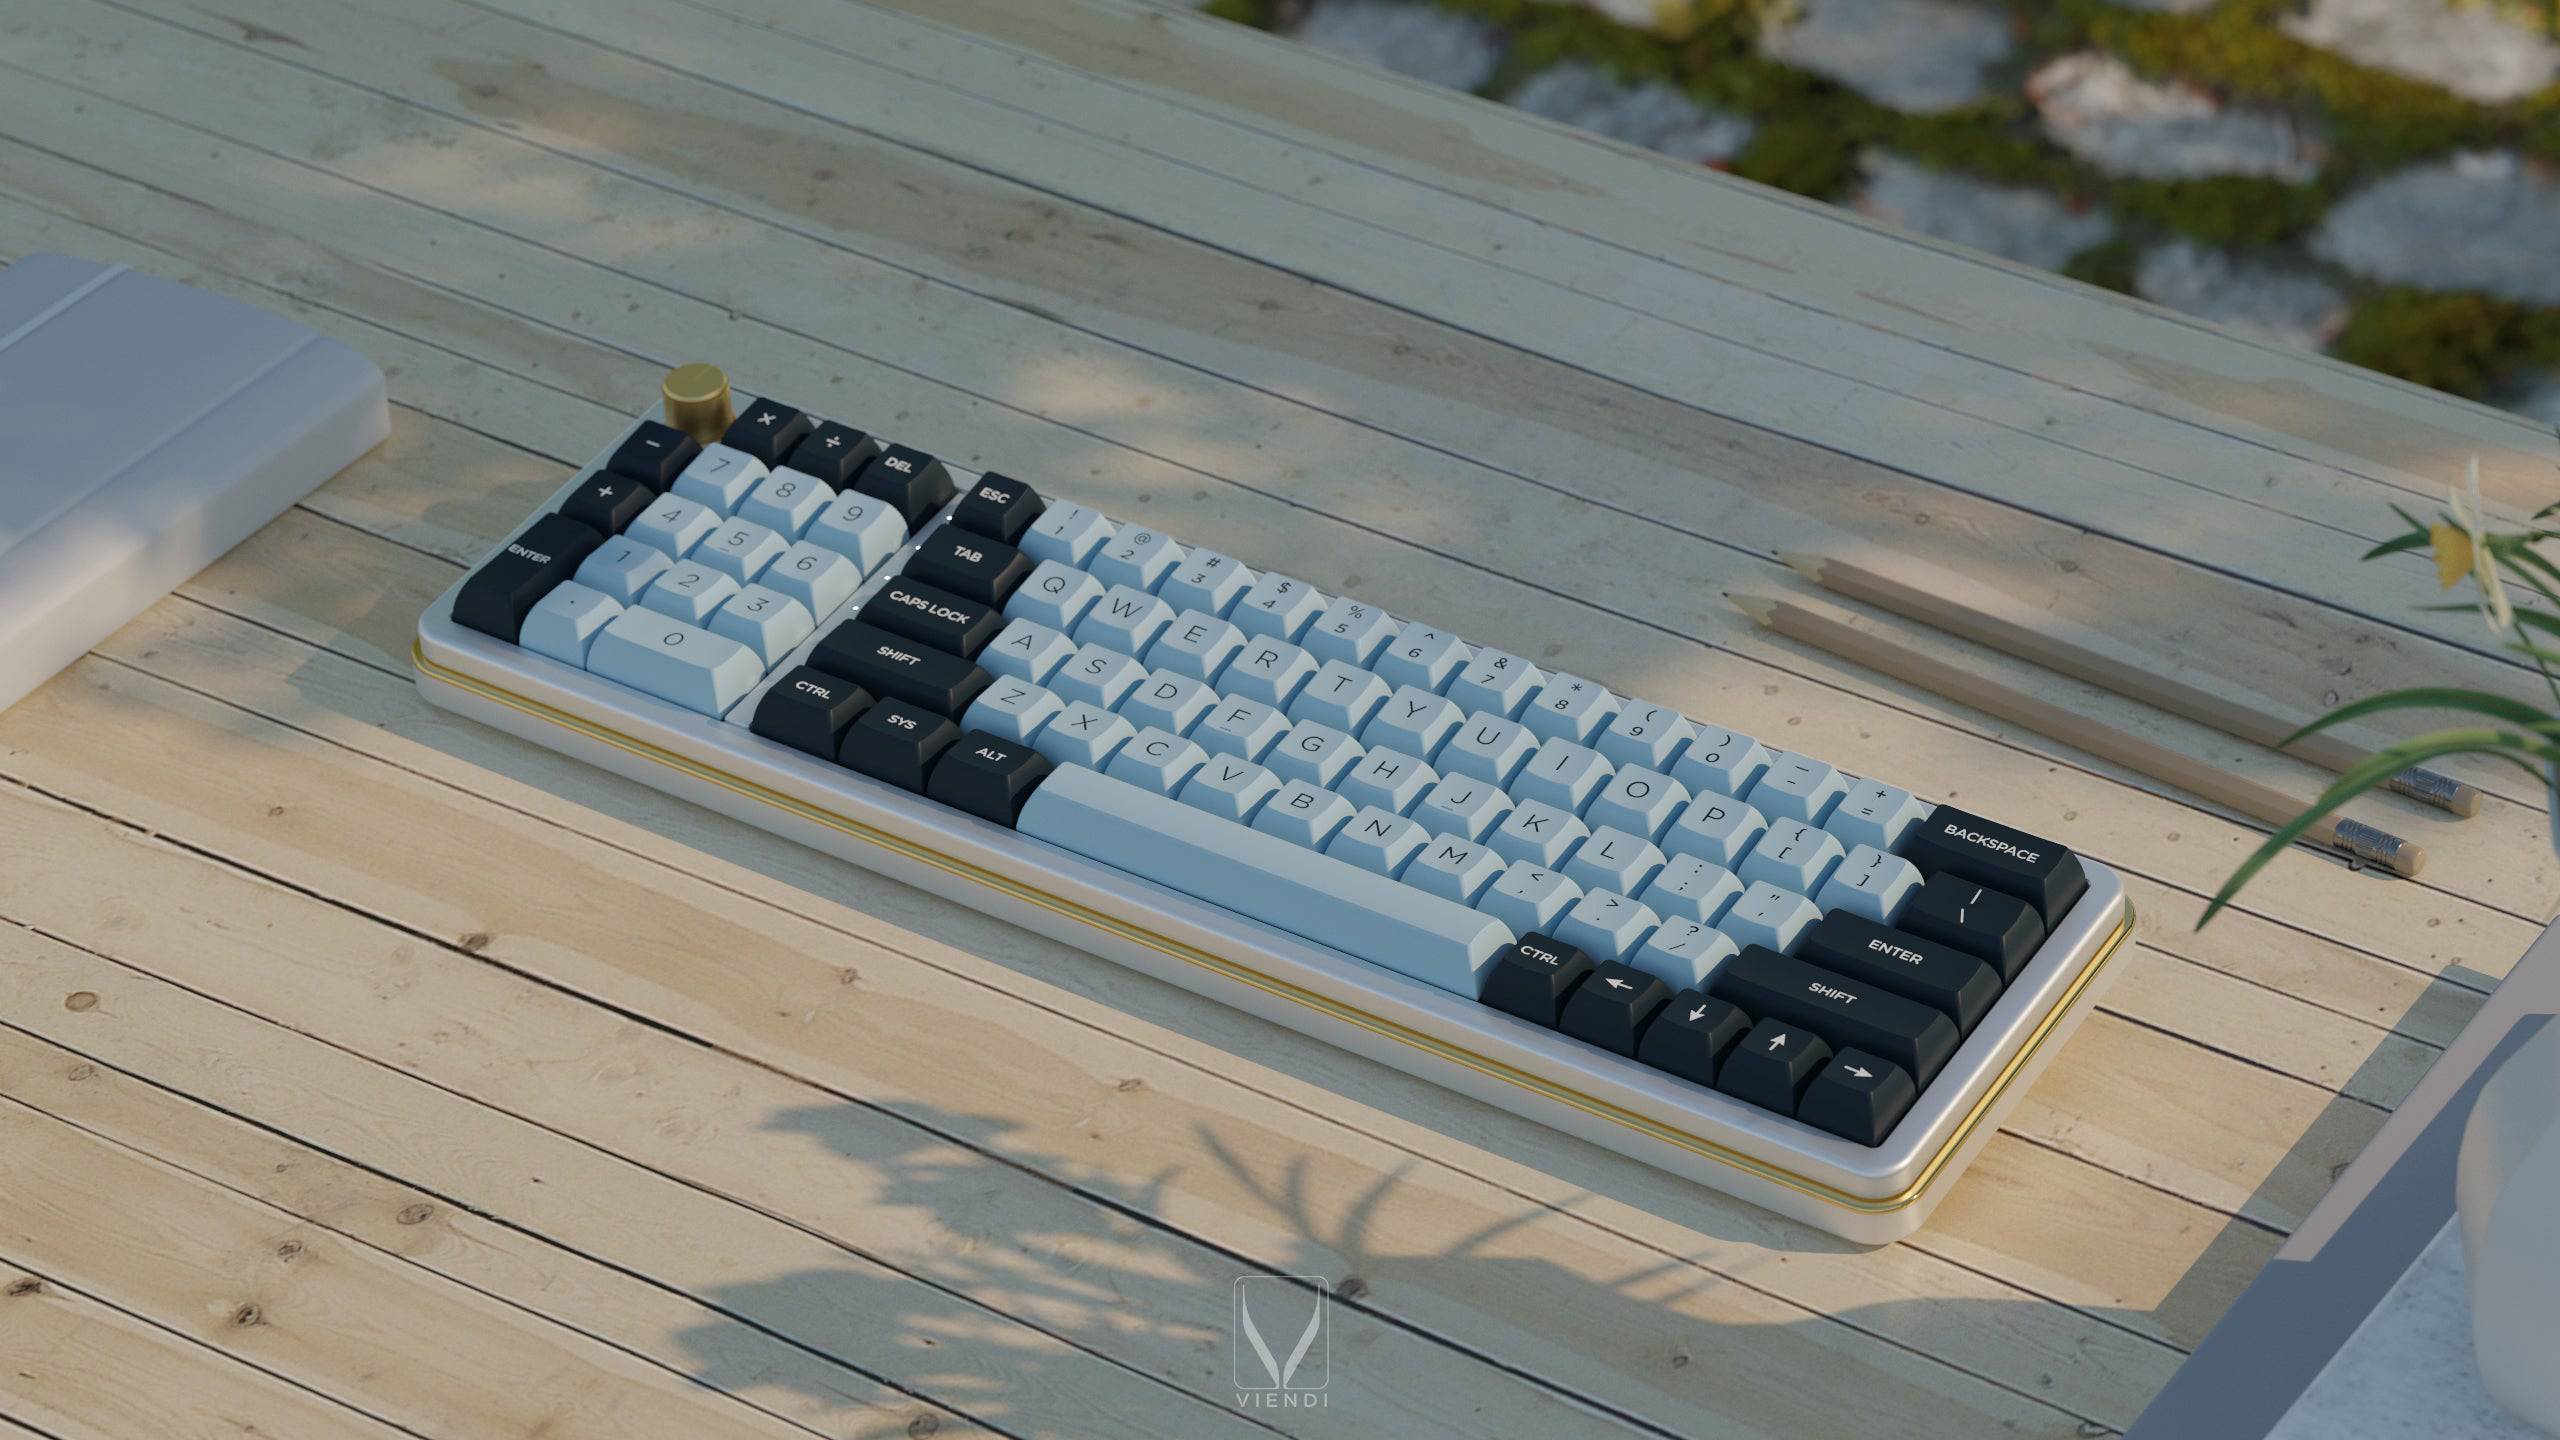 Viendi 8L full keyboard shown in the Mist color variant proxied by KeebsForAll